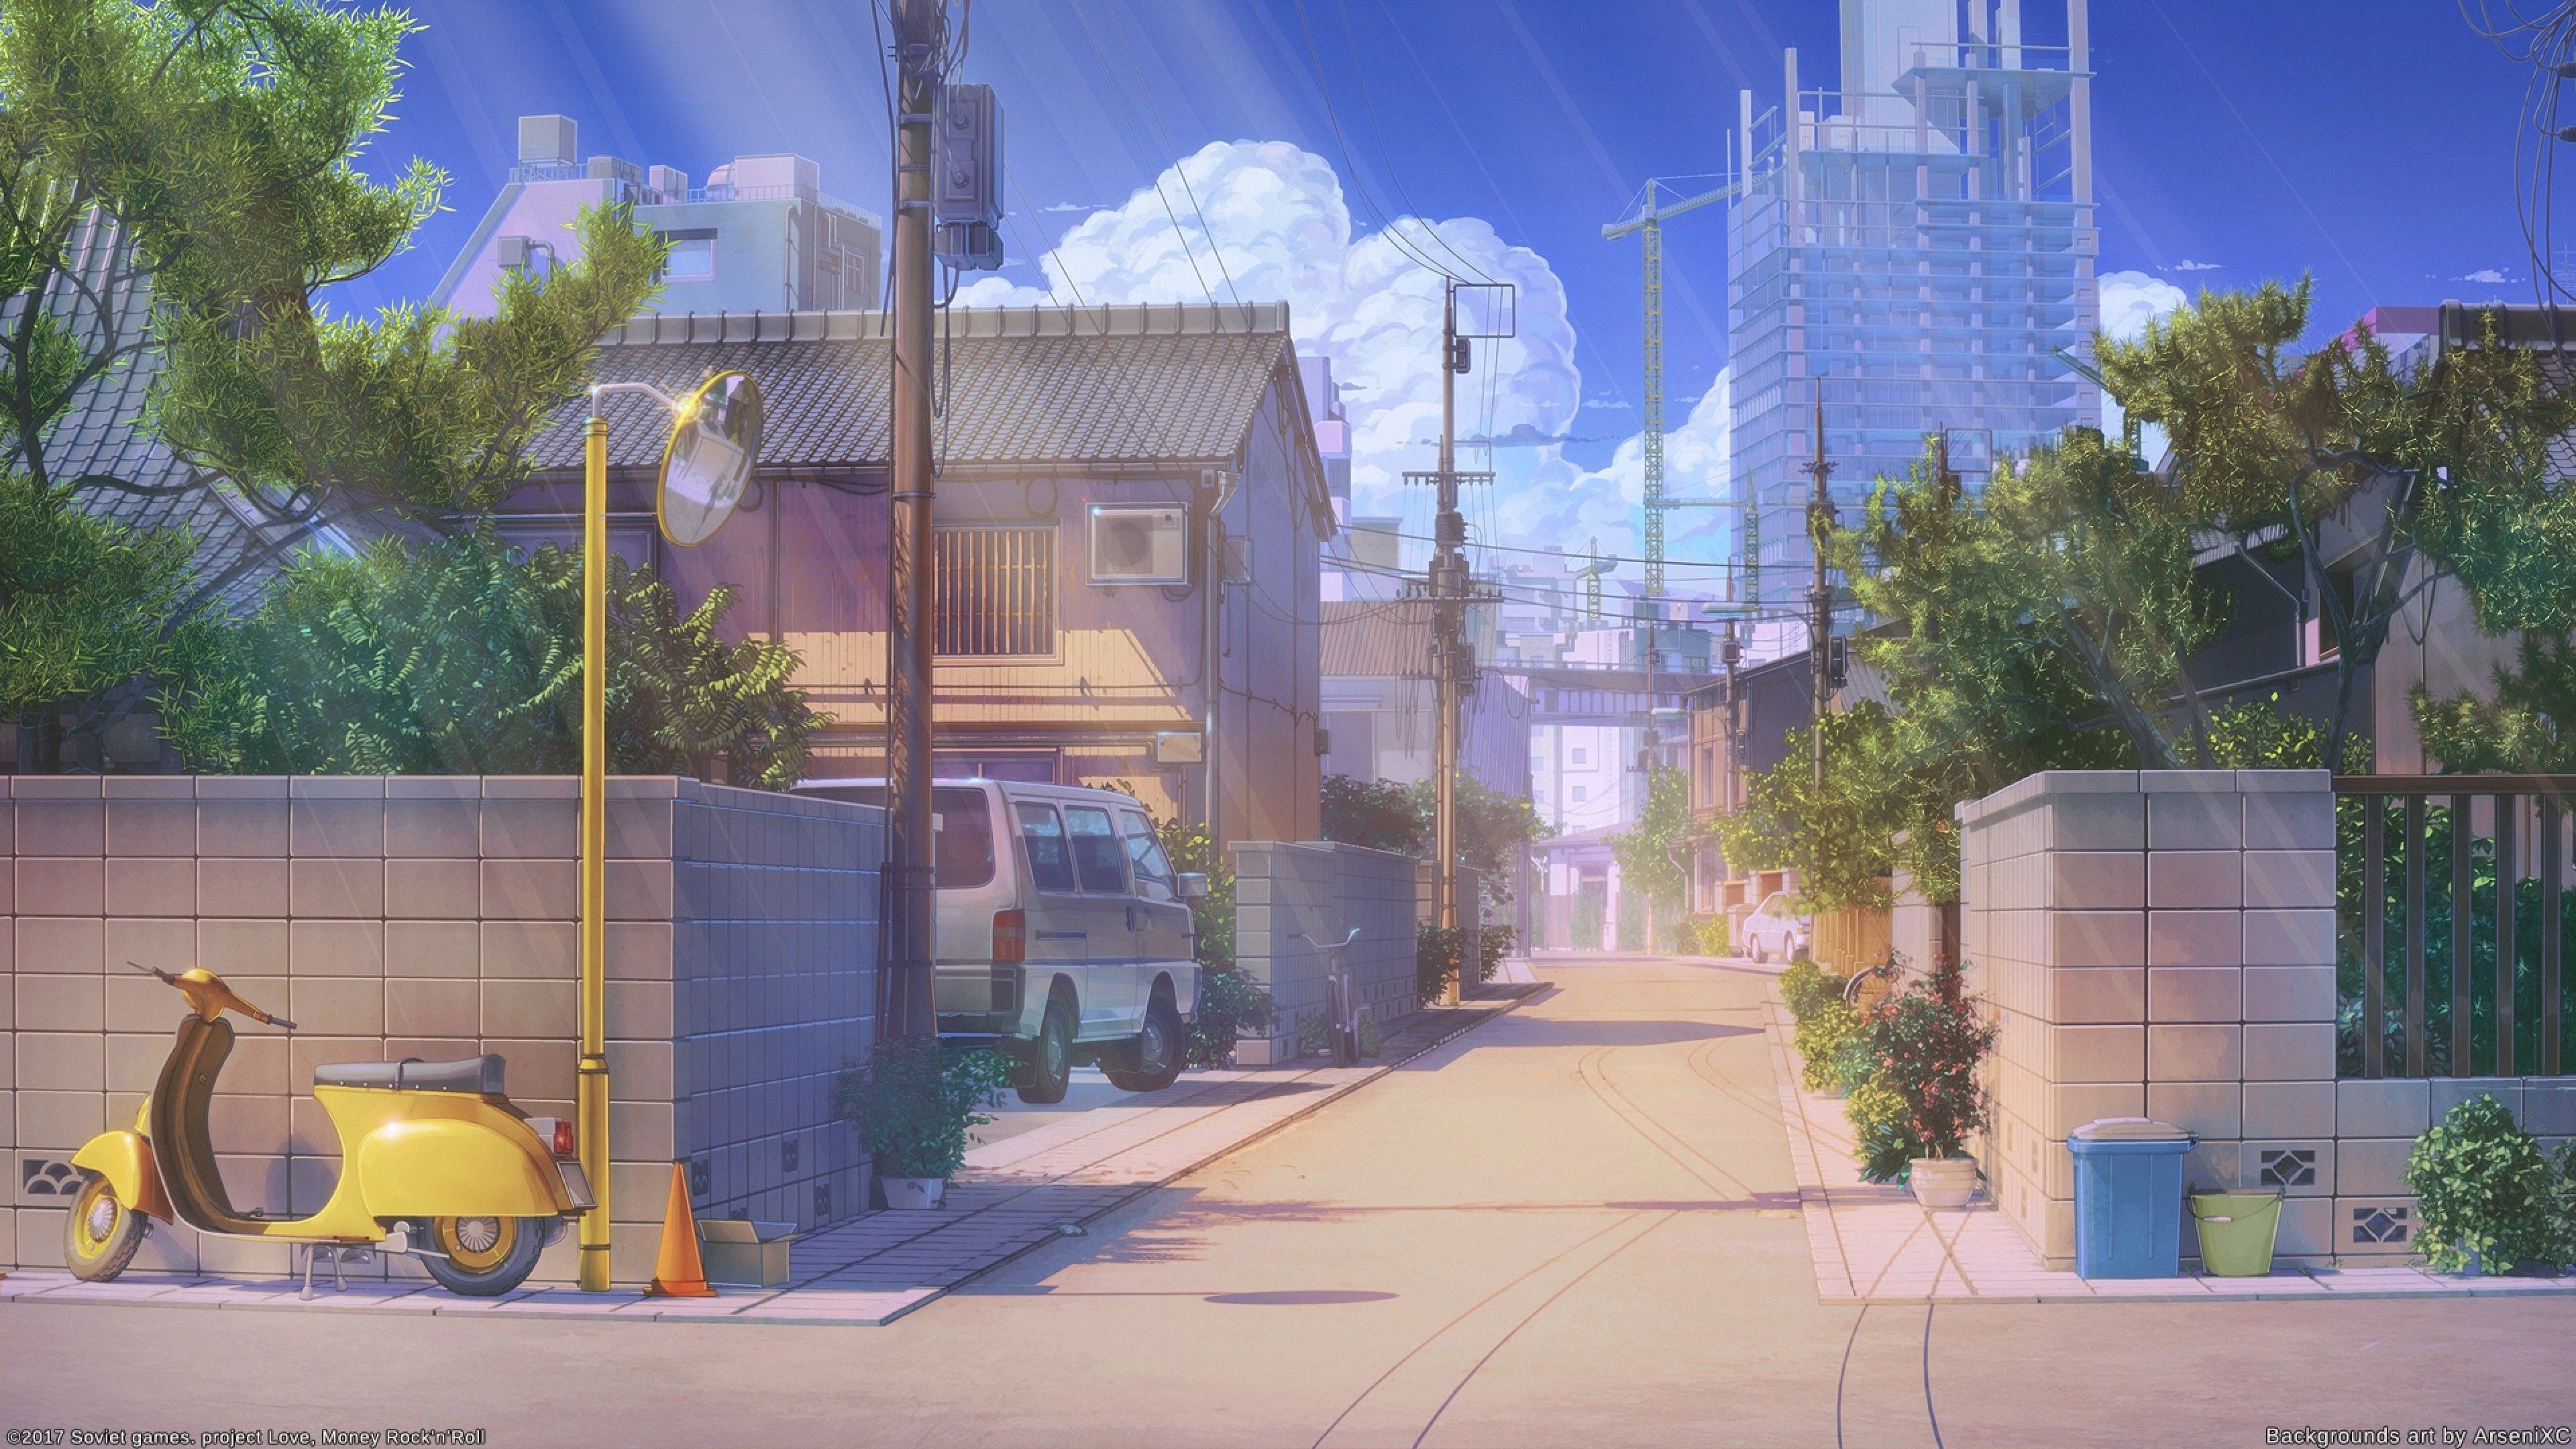 Download 3840x2160 Anime Street, Scenic, Buildings, Bicycle